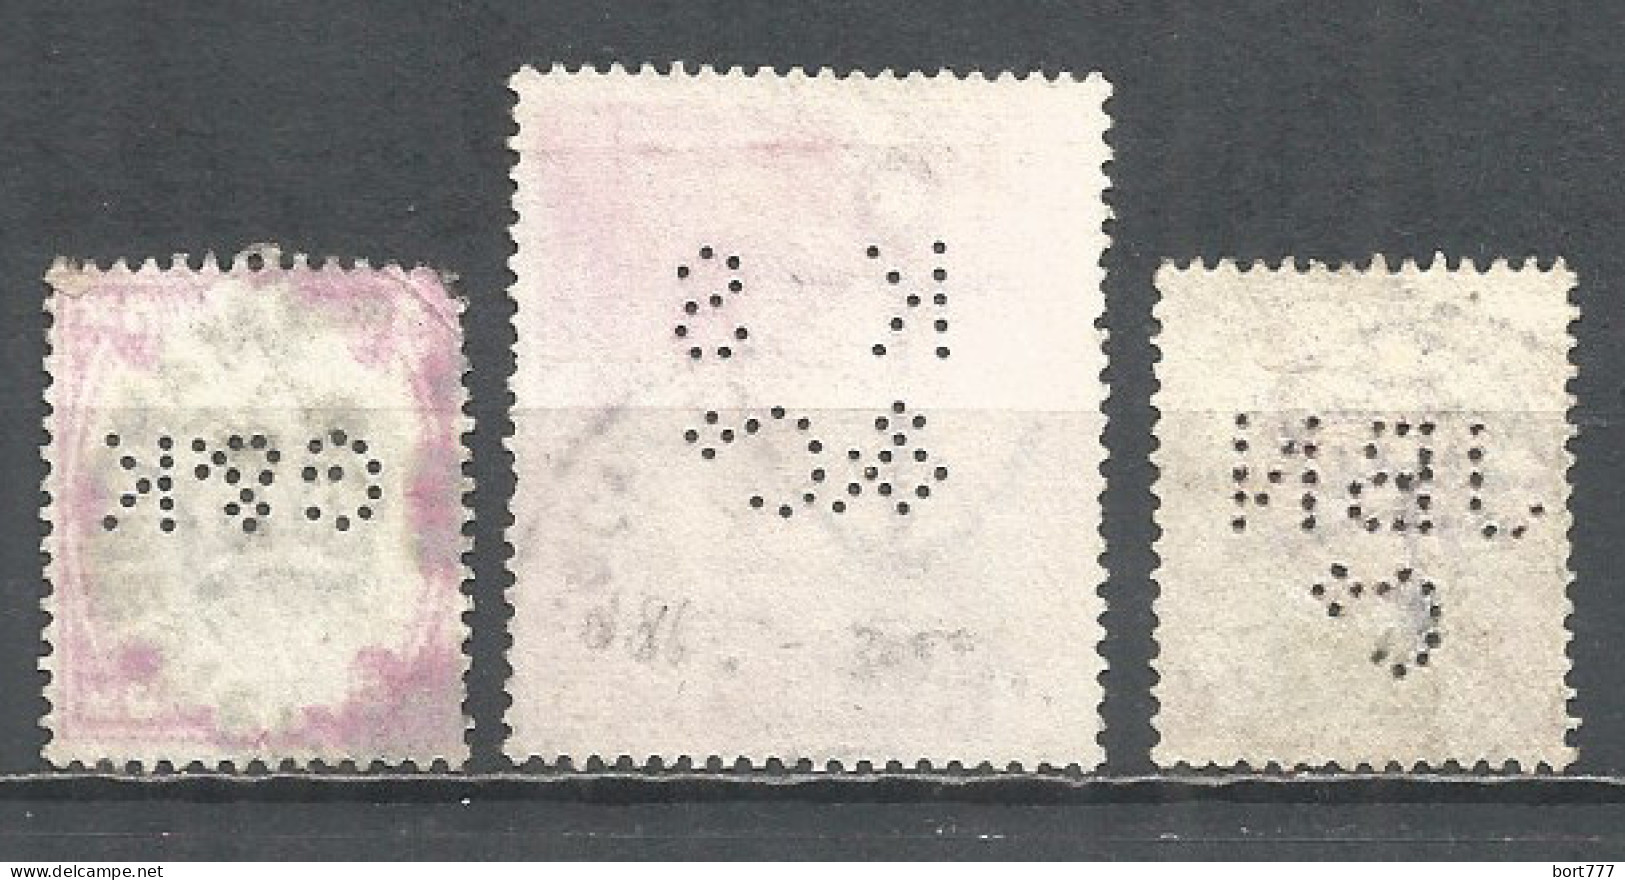 Perfins Great Britain , 3 Old Stamps - Perforés